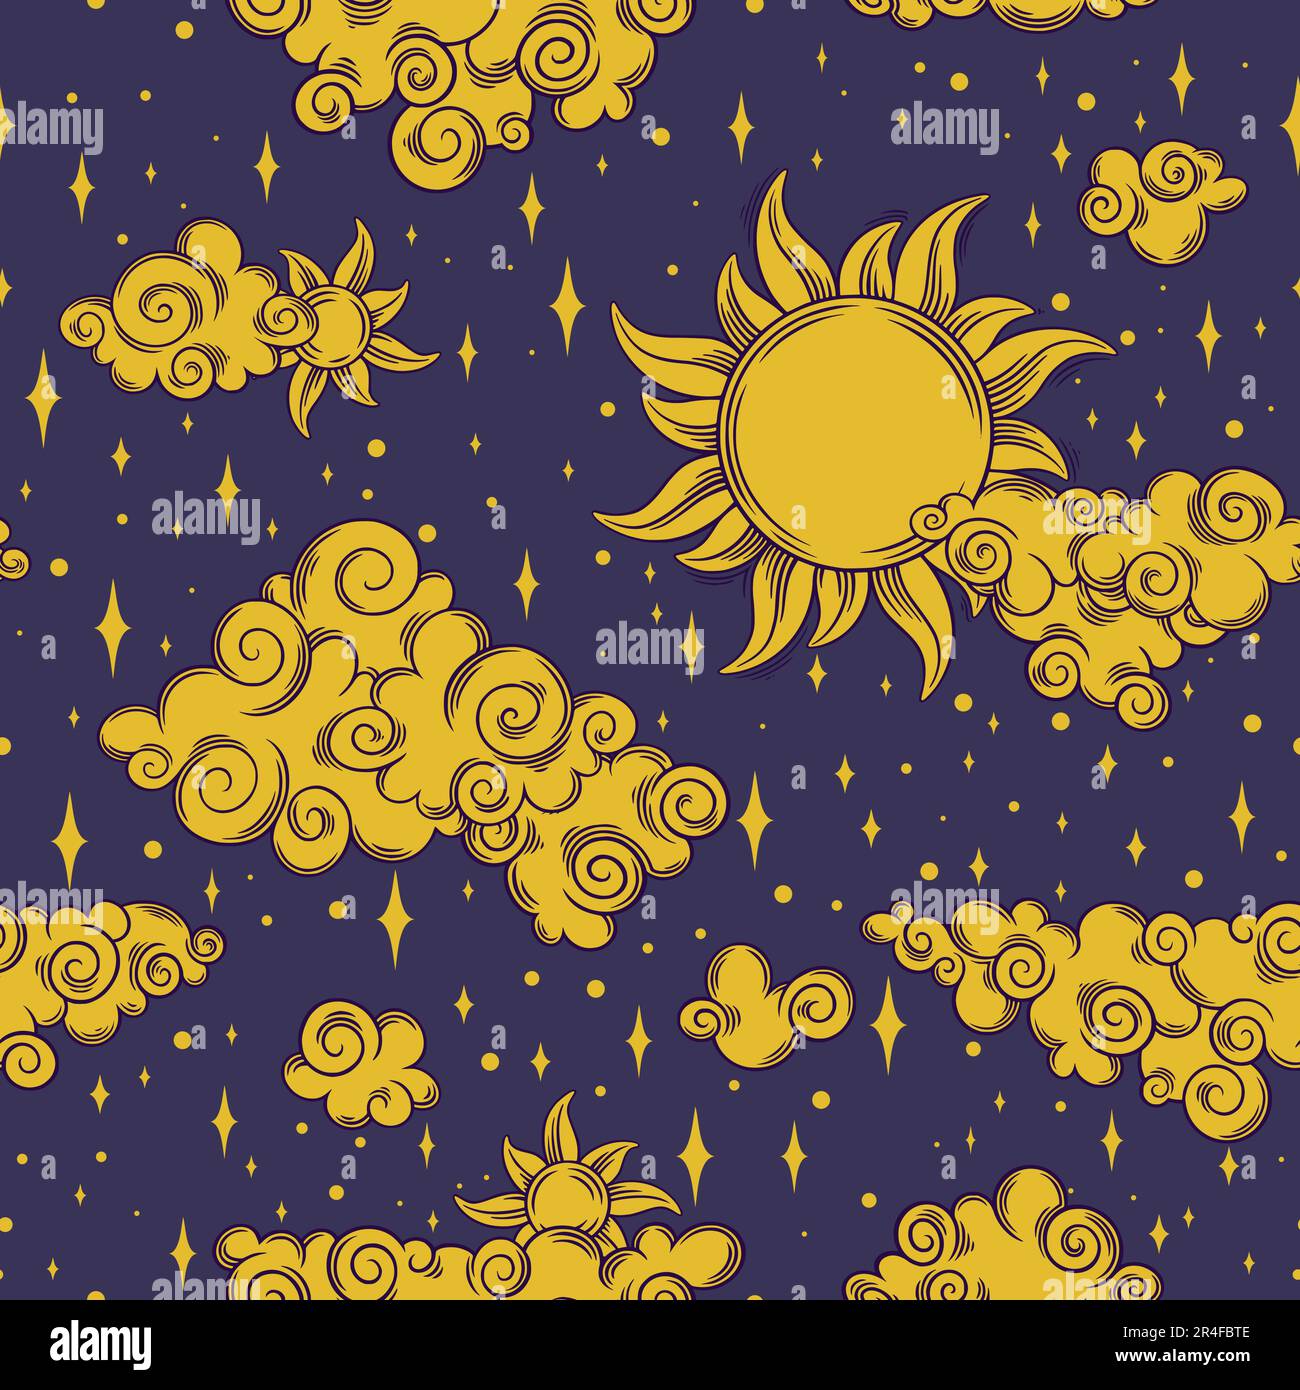 Tarot seamless pattern with sun, clouds and stars. Tarot aesthetic tile with golden cosmic objects. Vector illustration on dark background Stock Vector